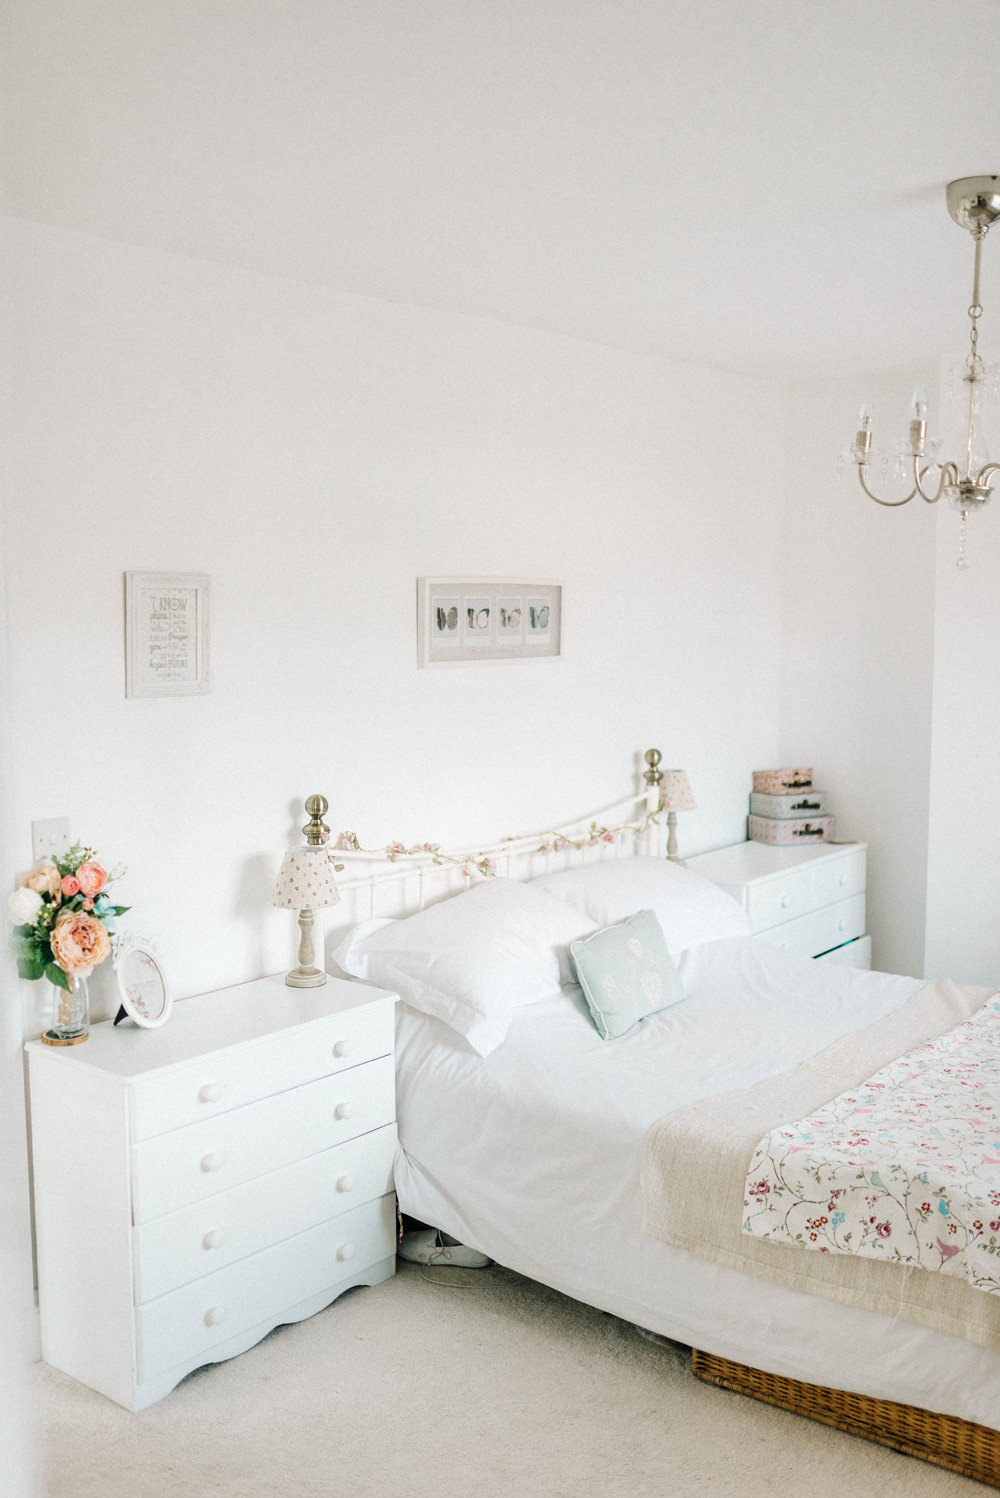 Painted furniture and vintage style bed